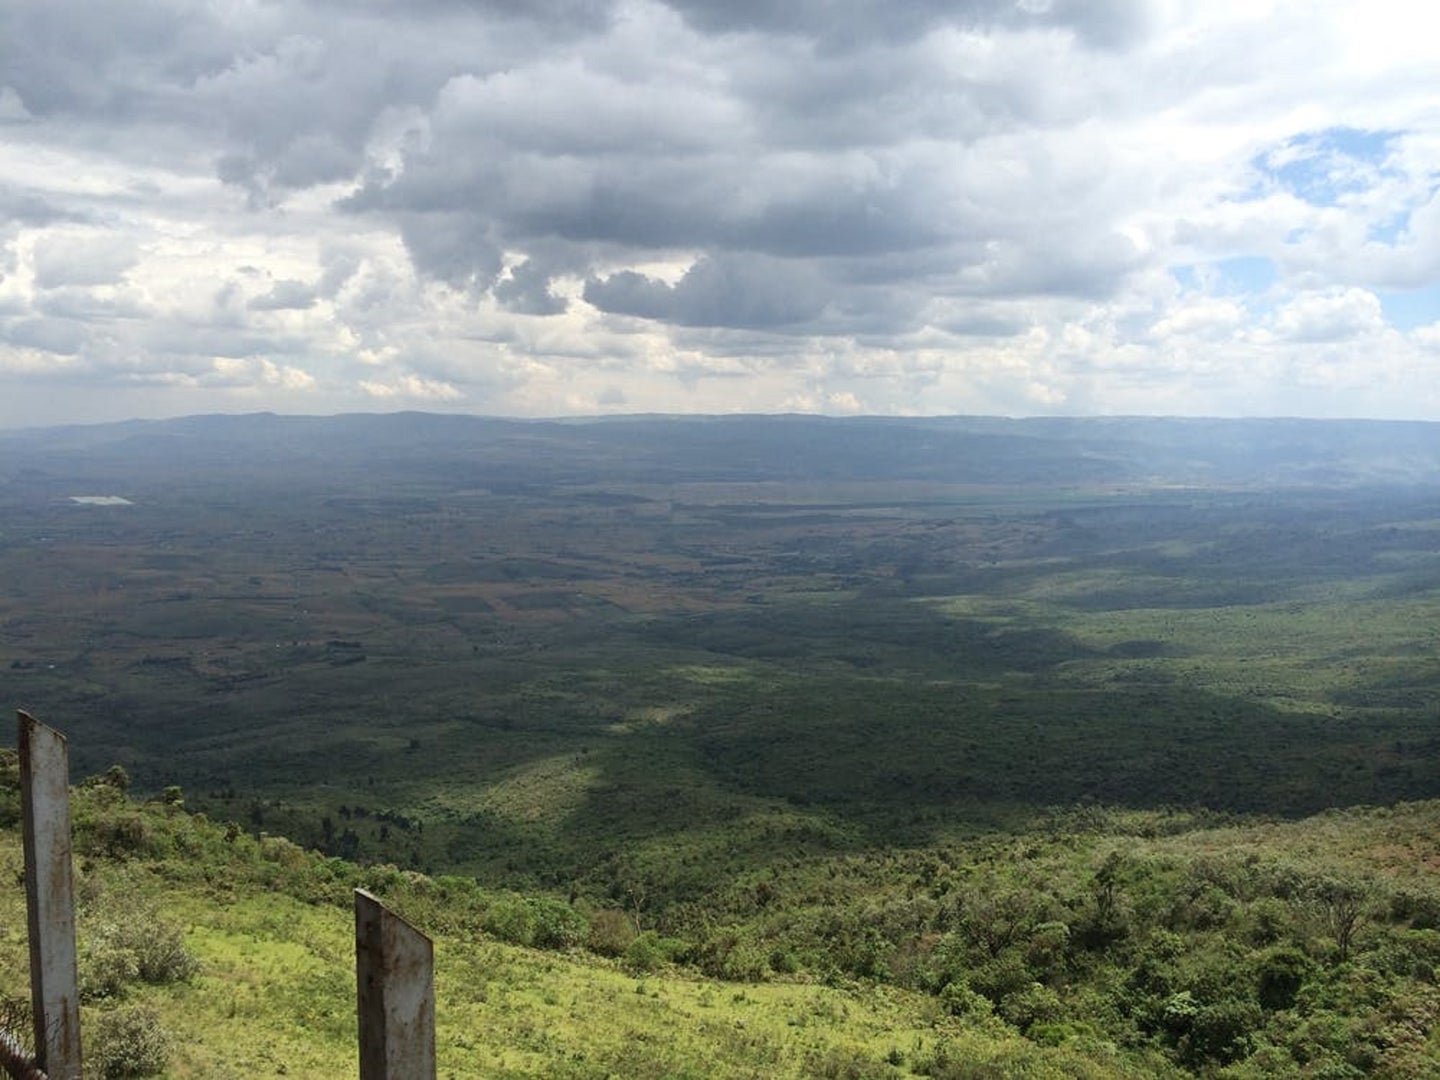 Lush green hills in the Rift Valley in East Africa